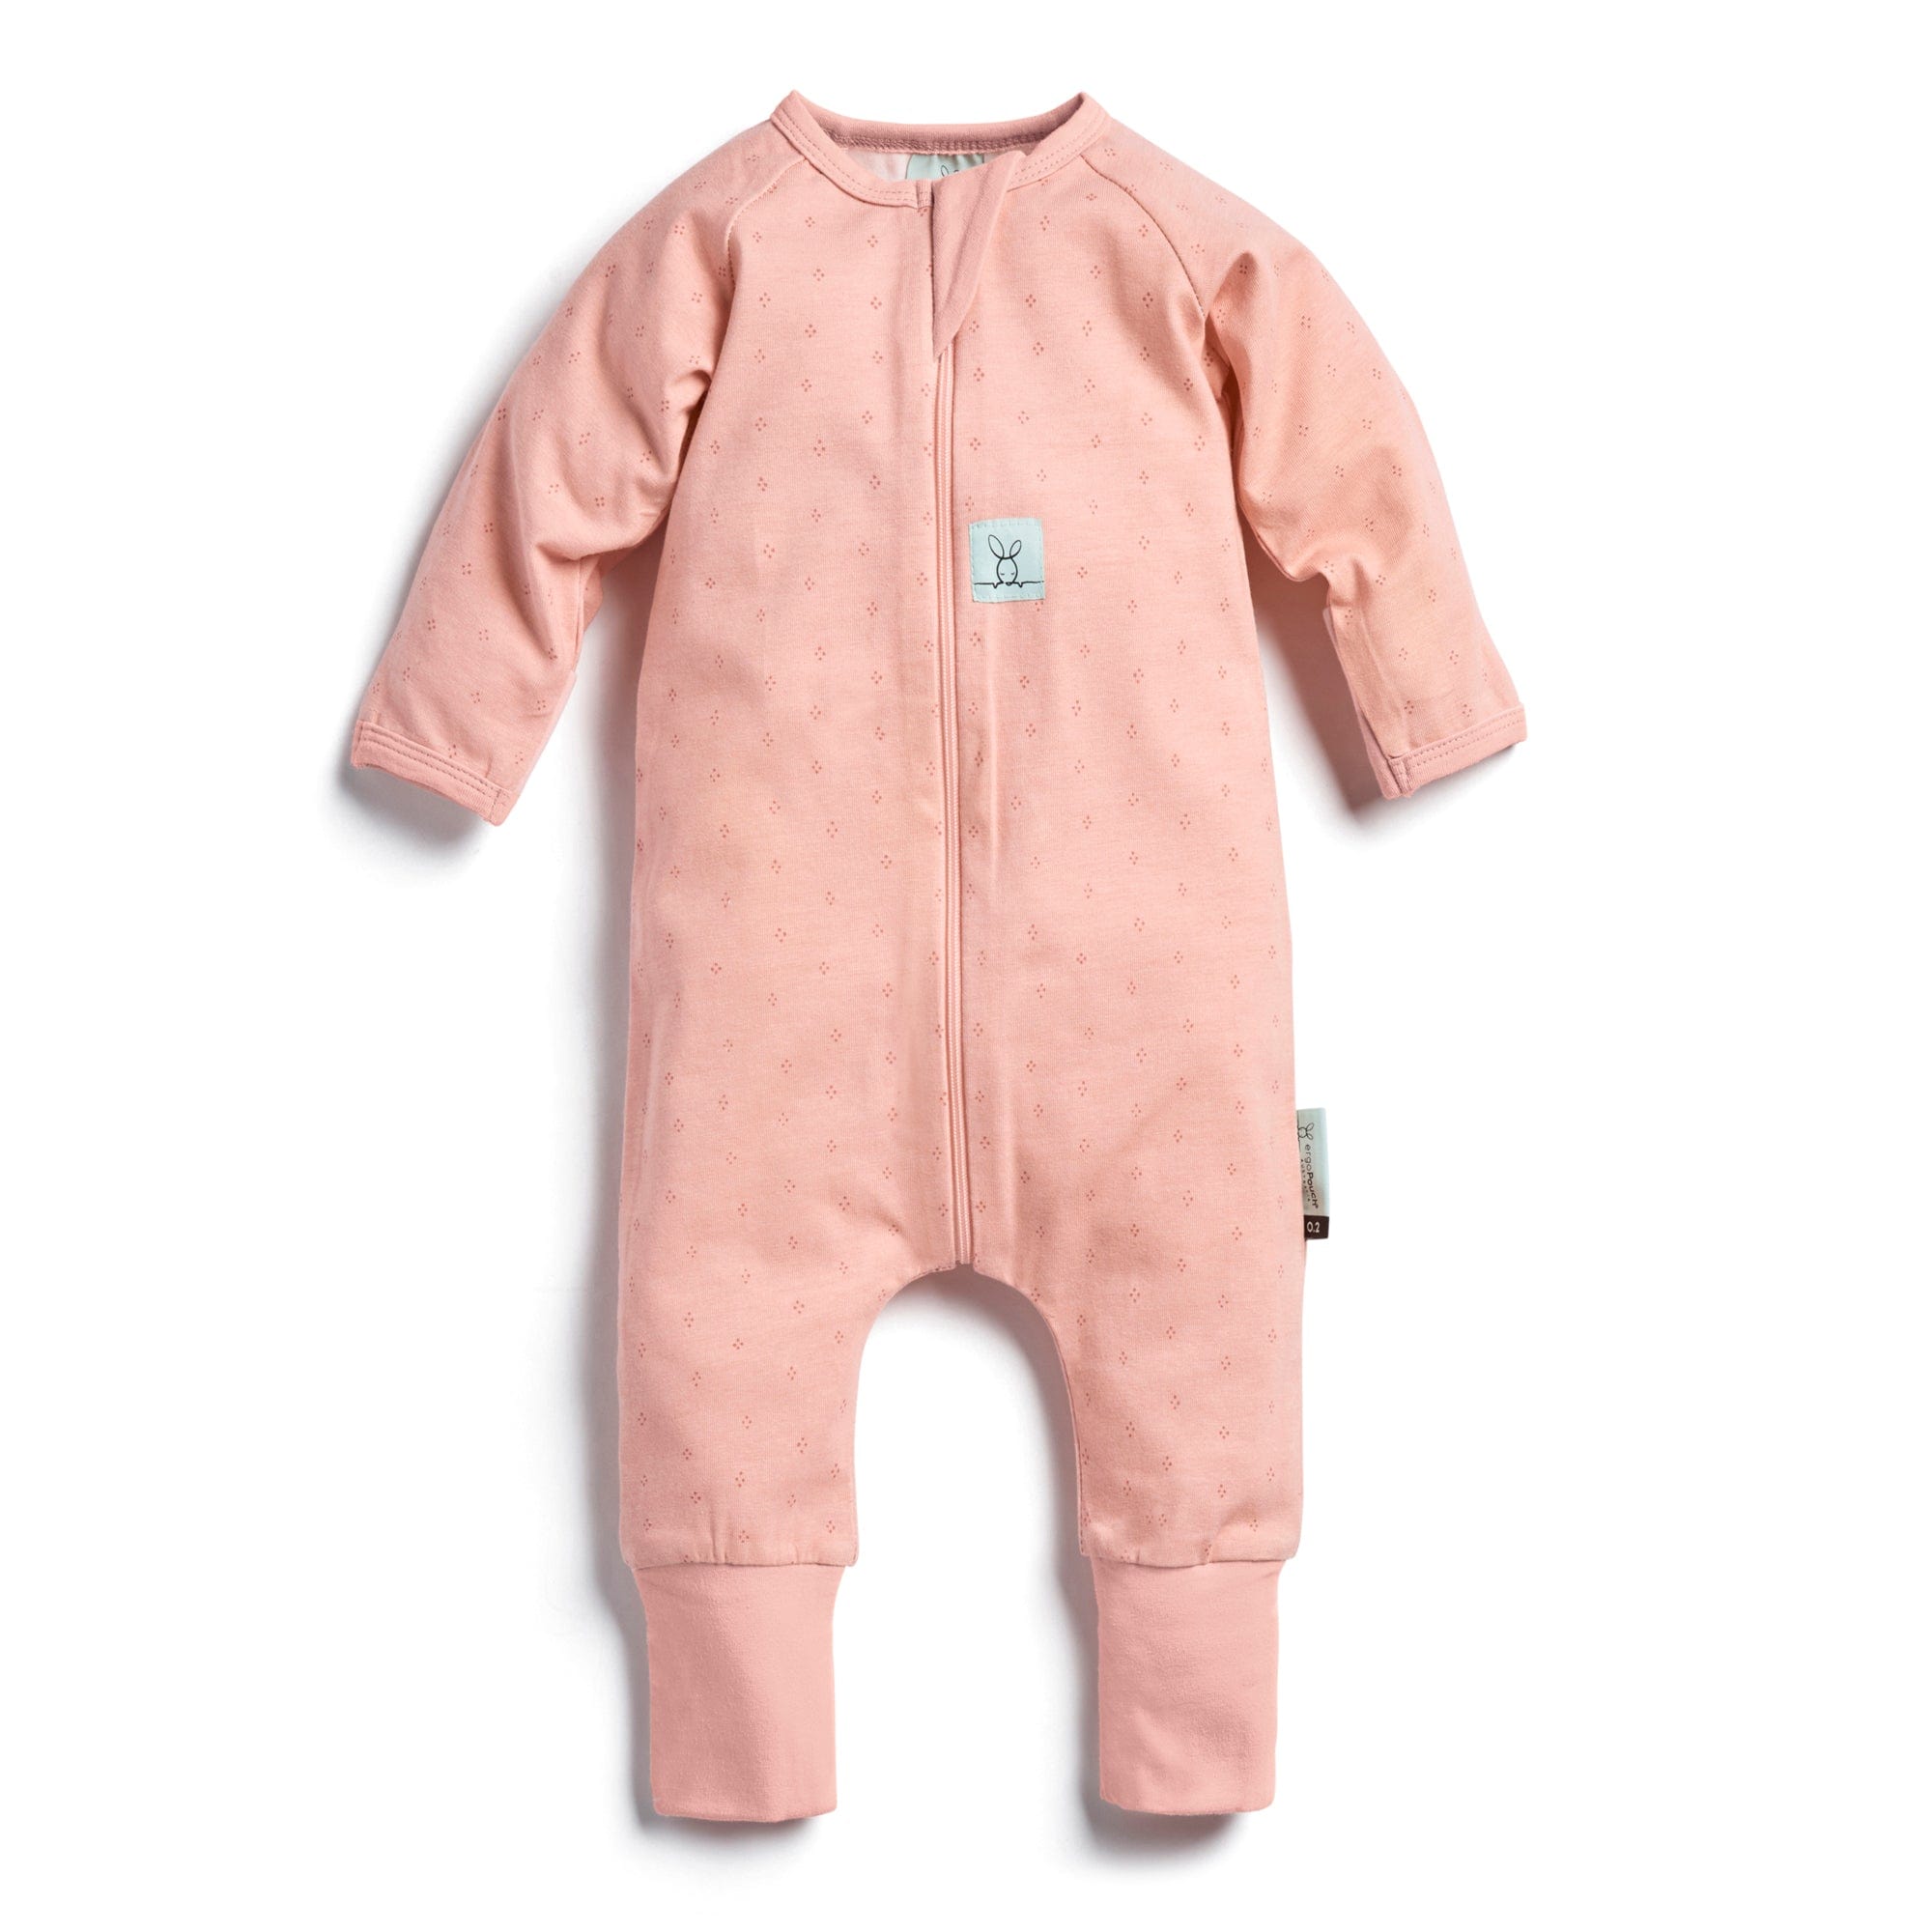 Layers Long Sleeve Sleepsuit 0.2 Tog For Baby By ergoPouch - Berries